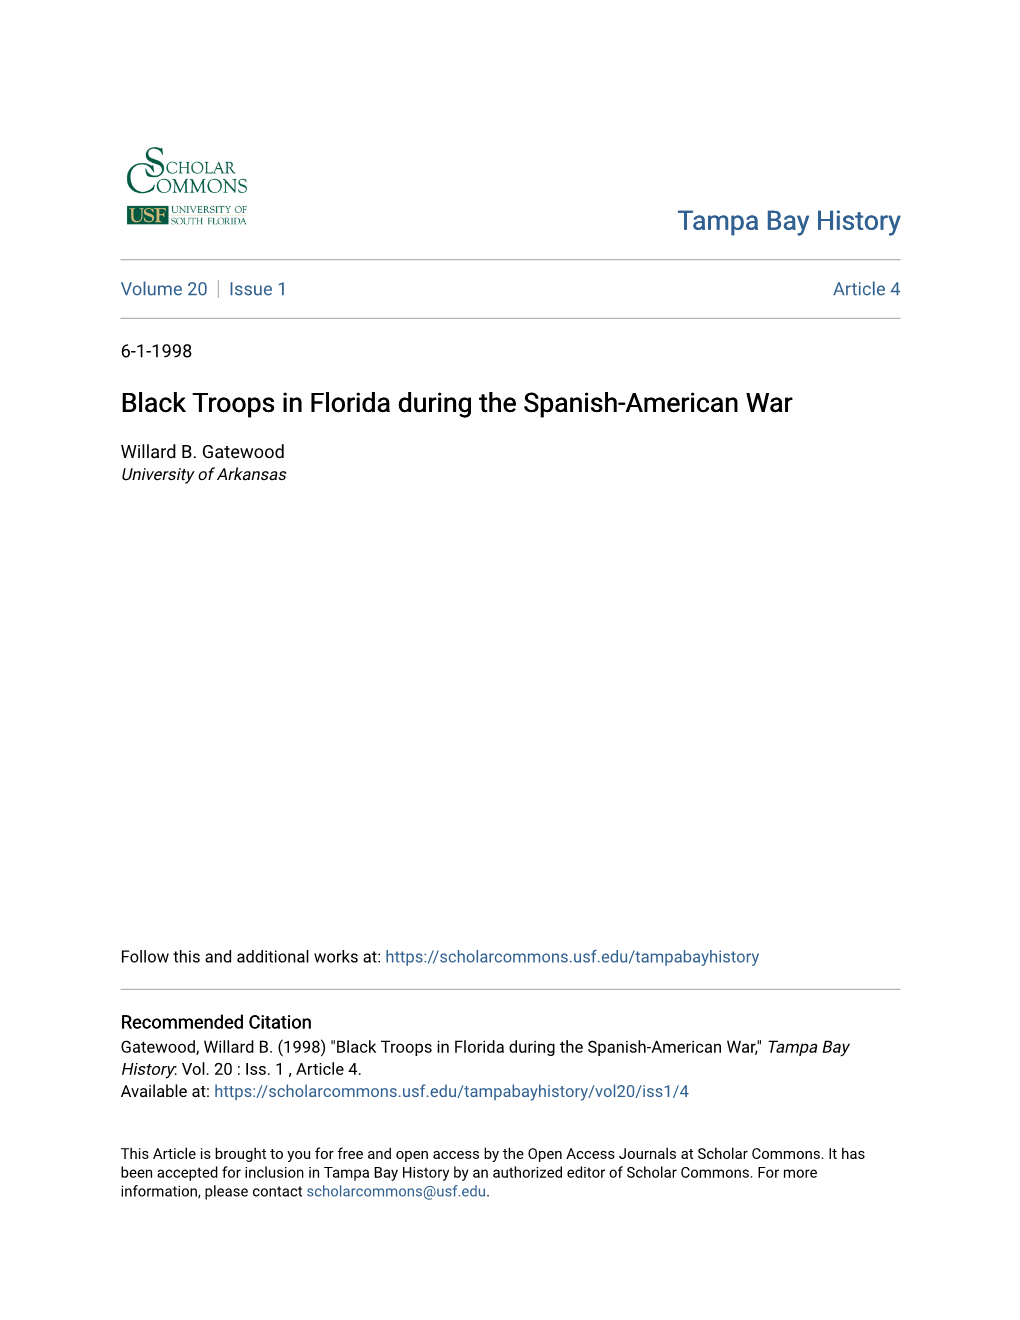 Black Troops in Florida During the Spanish-American War